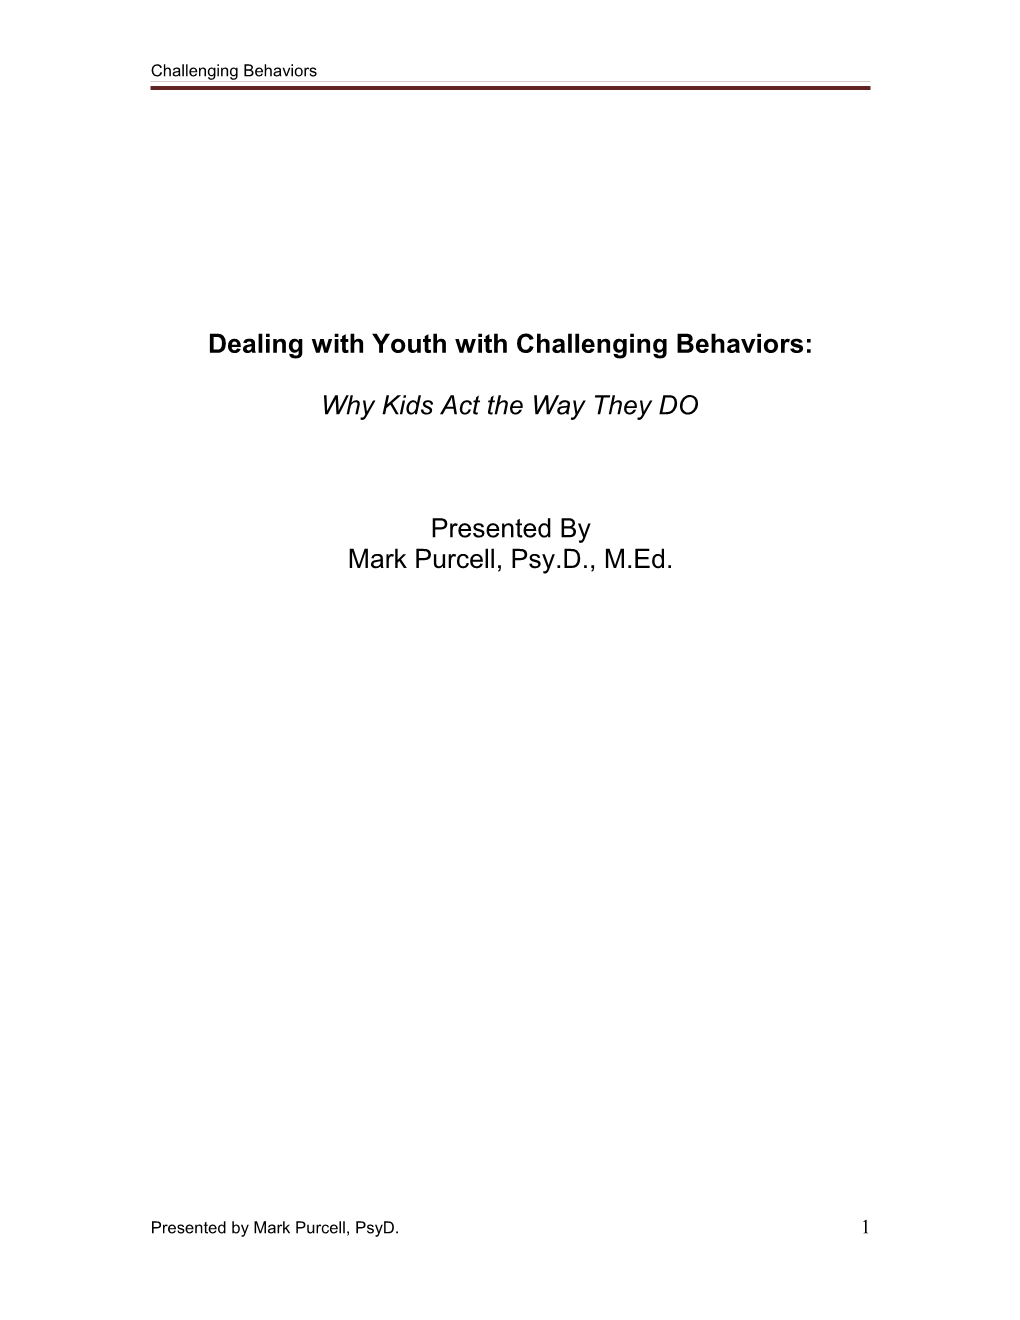 Dealing with Youth with Challenging Behaviors